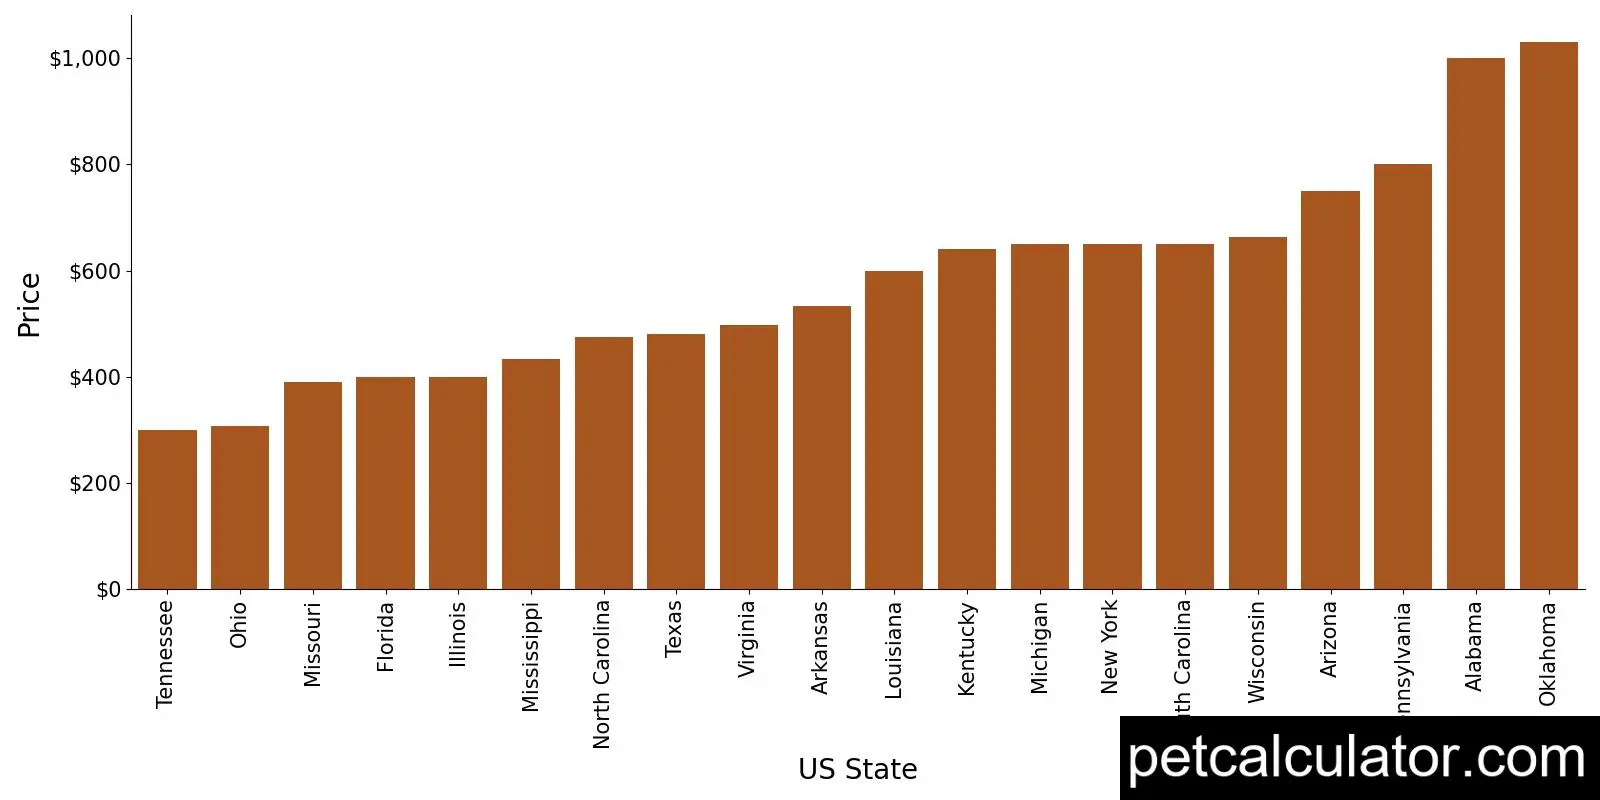 Price of Redbone Coonhound by US State 